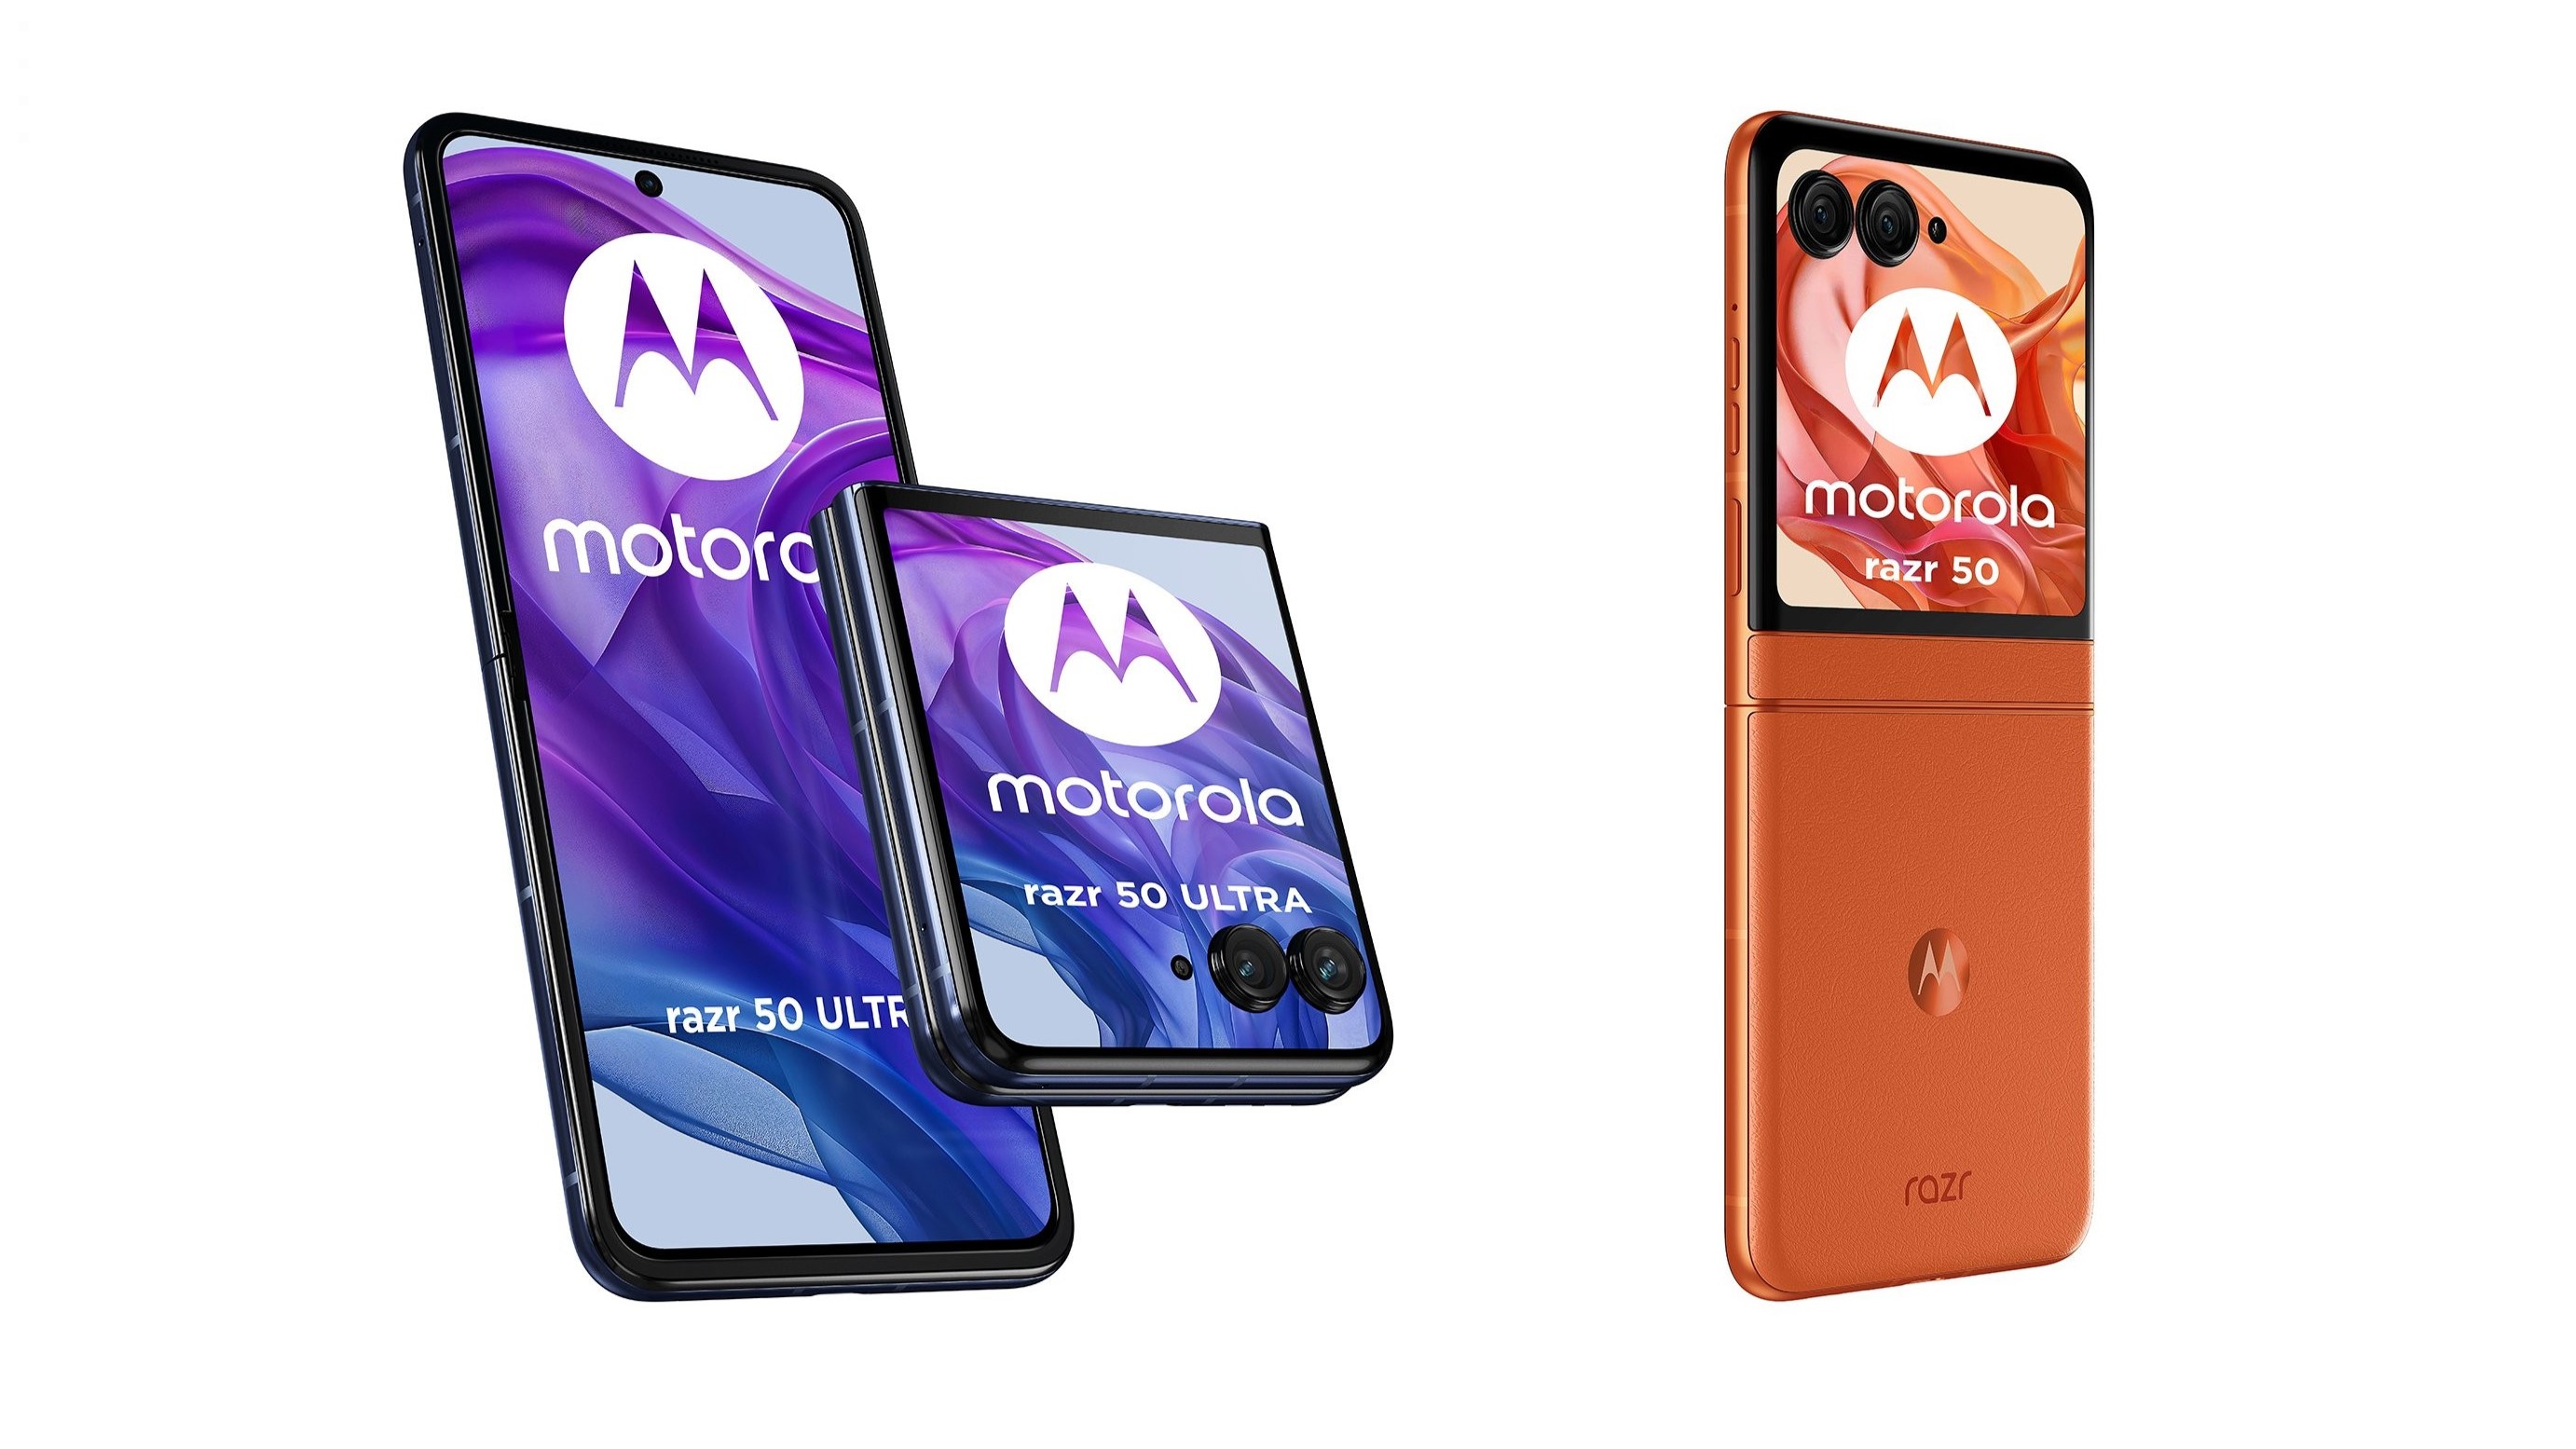 The Motorola Razr is doubling down on big cover screens, according to new leaks​​